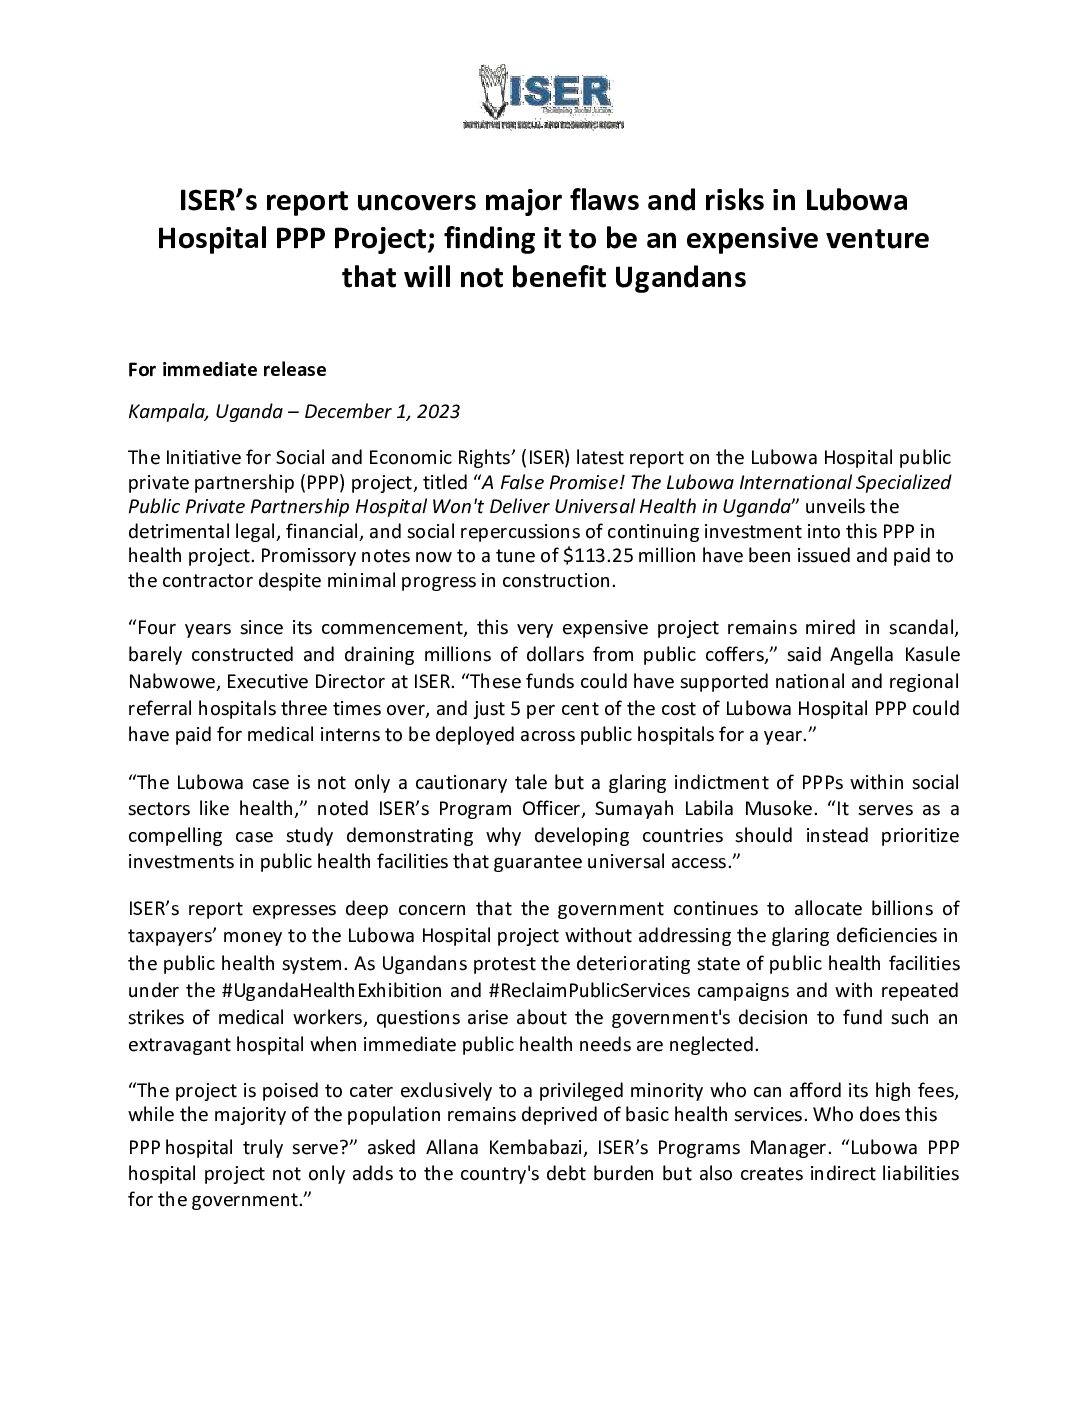 Press Release: ISER's report uncovers major flaws and risks in Lubowa Hospital PPP Project, finding it to be an expensive venture that won’t benefit Ugandans